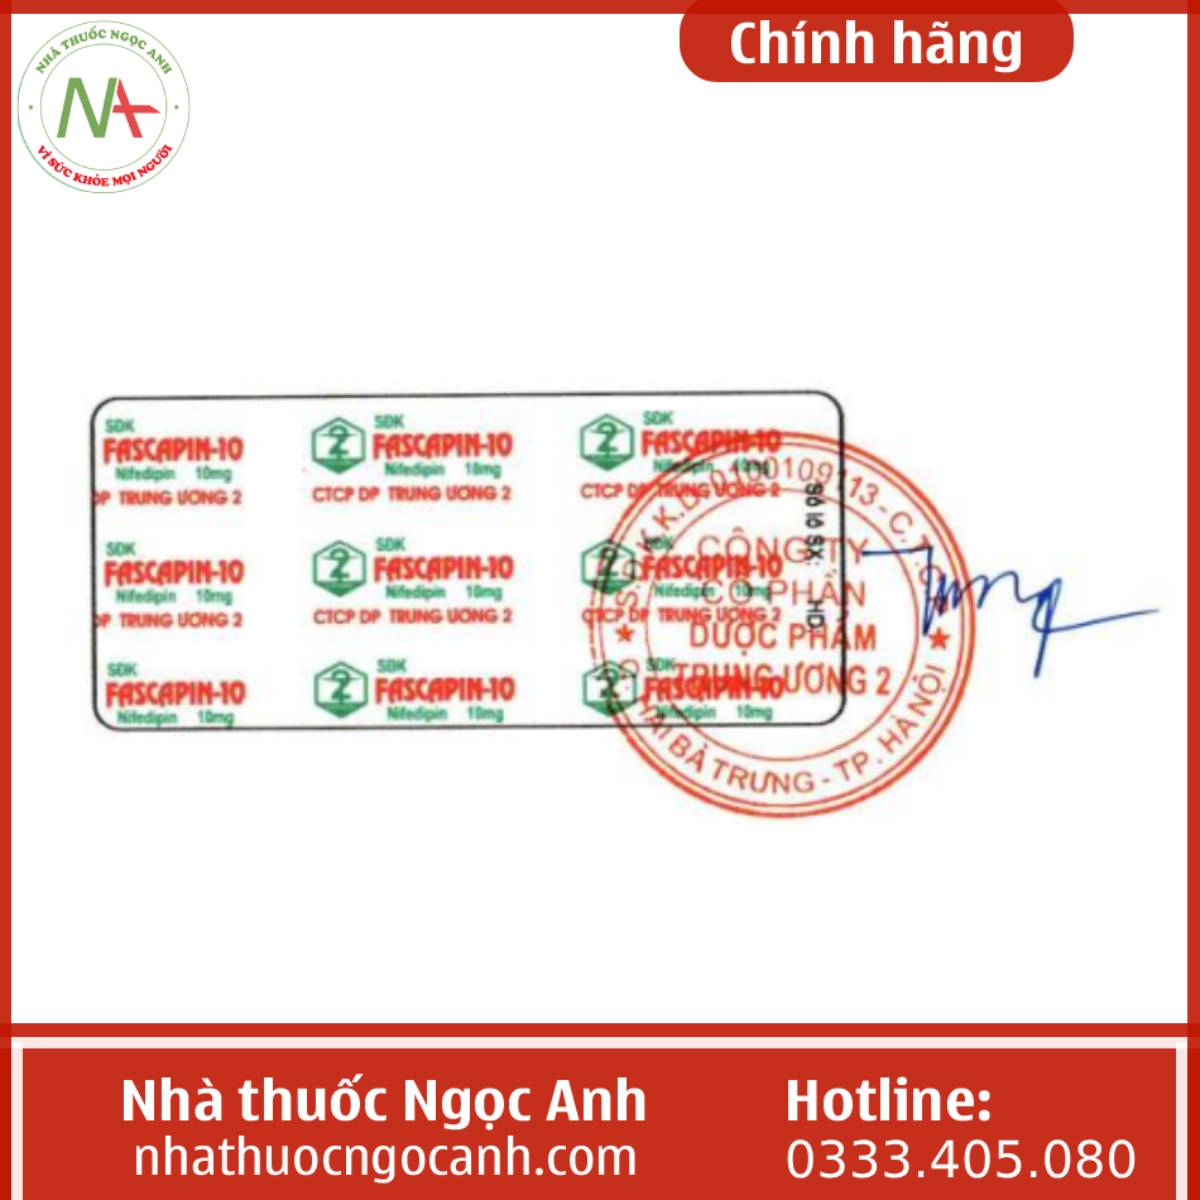 thuốc Fascapin-10